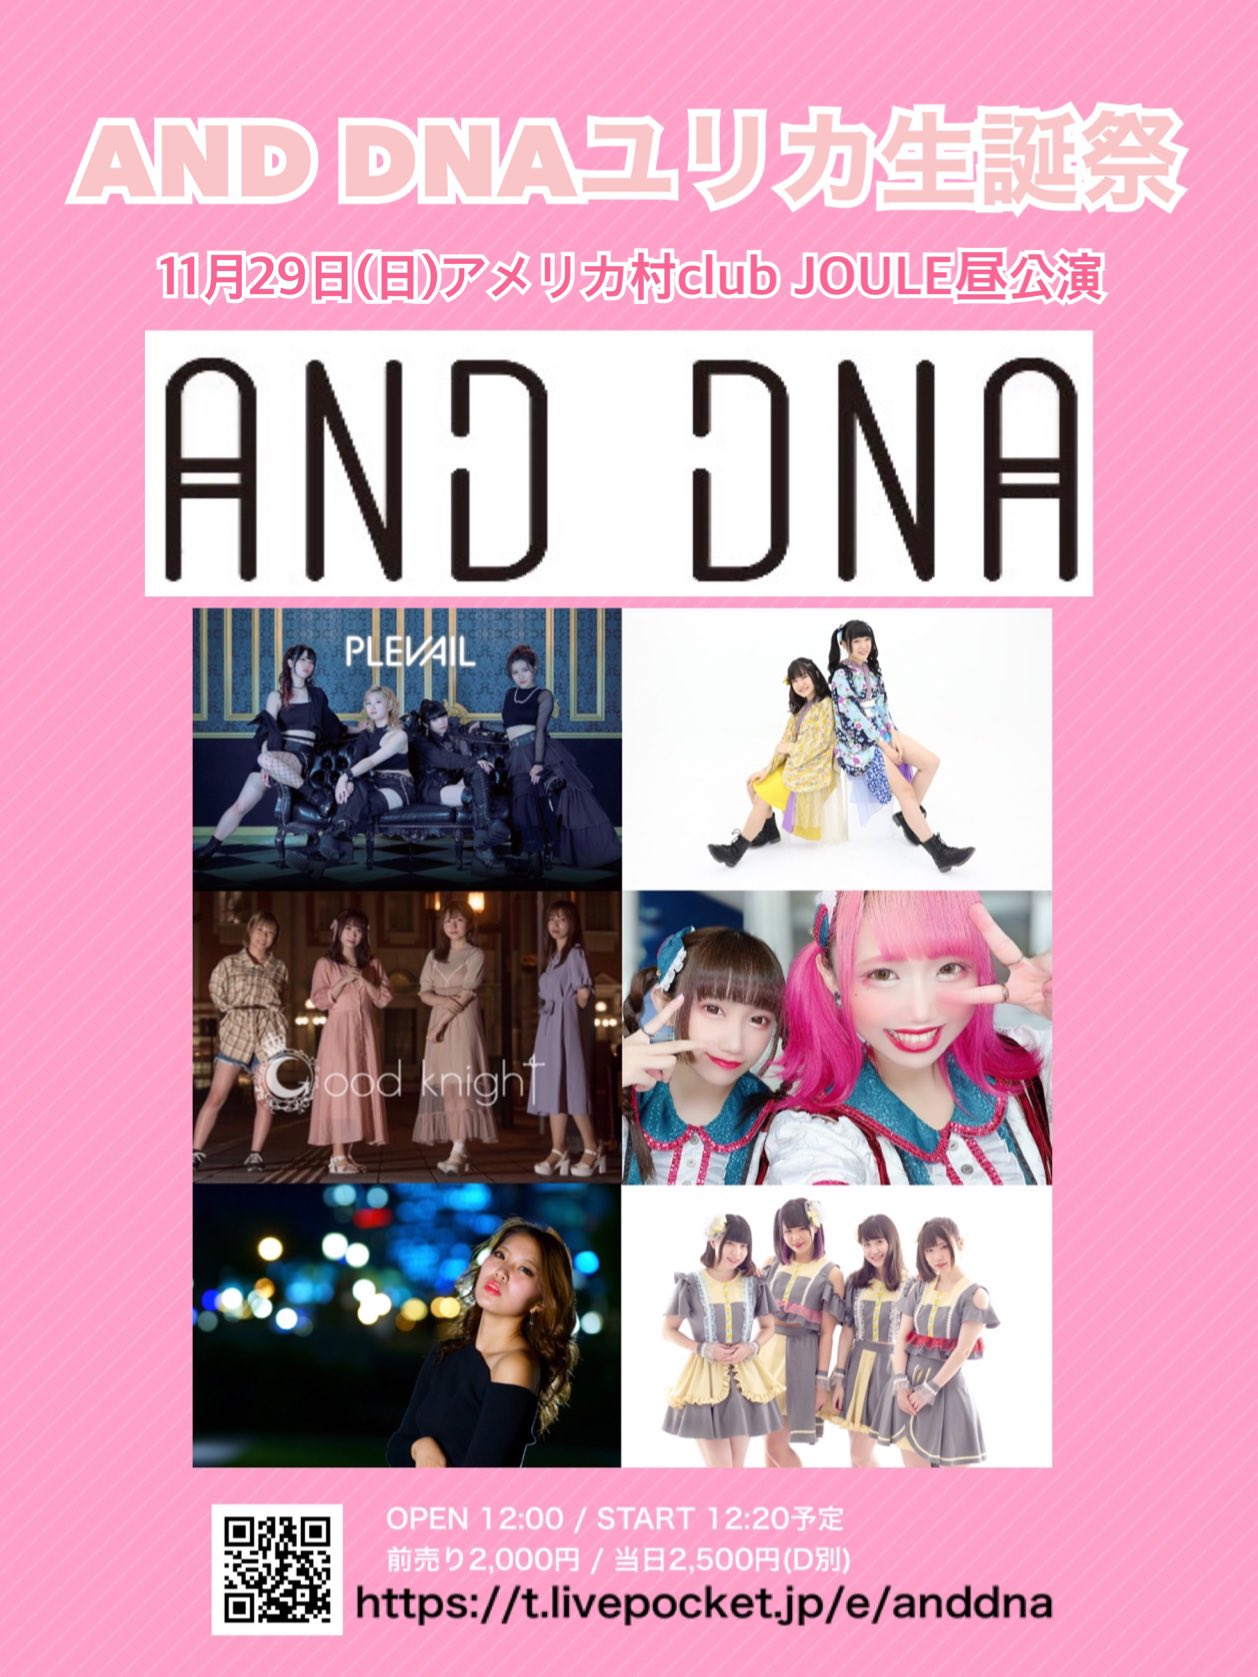 AND DNA ユリカ生誕祭